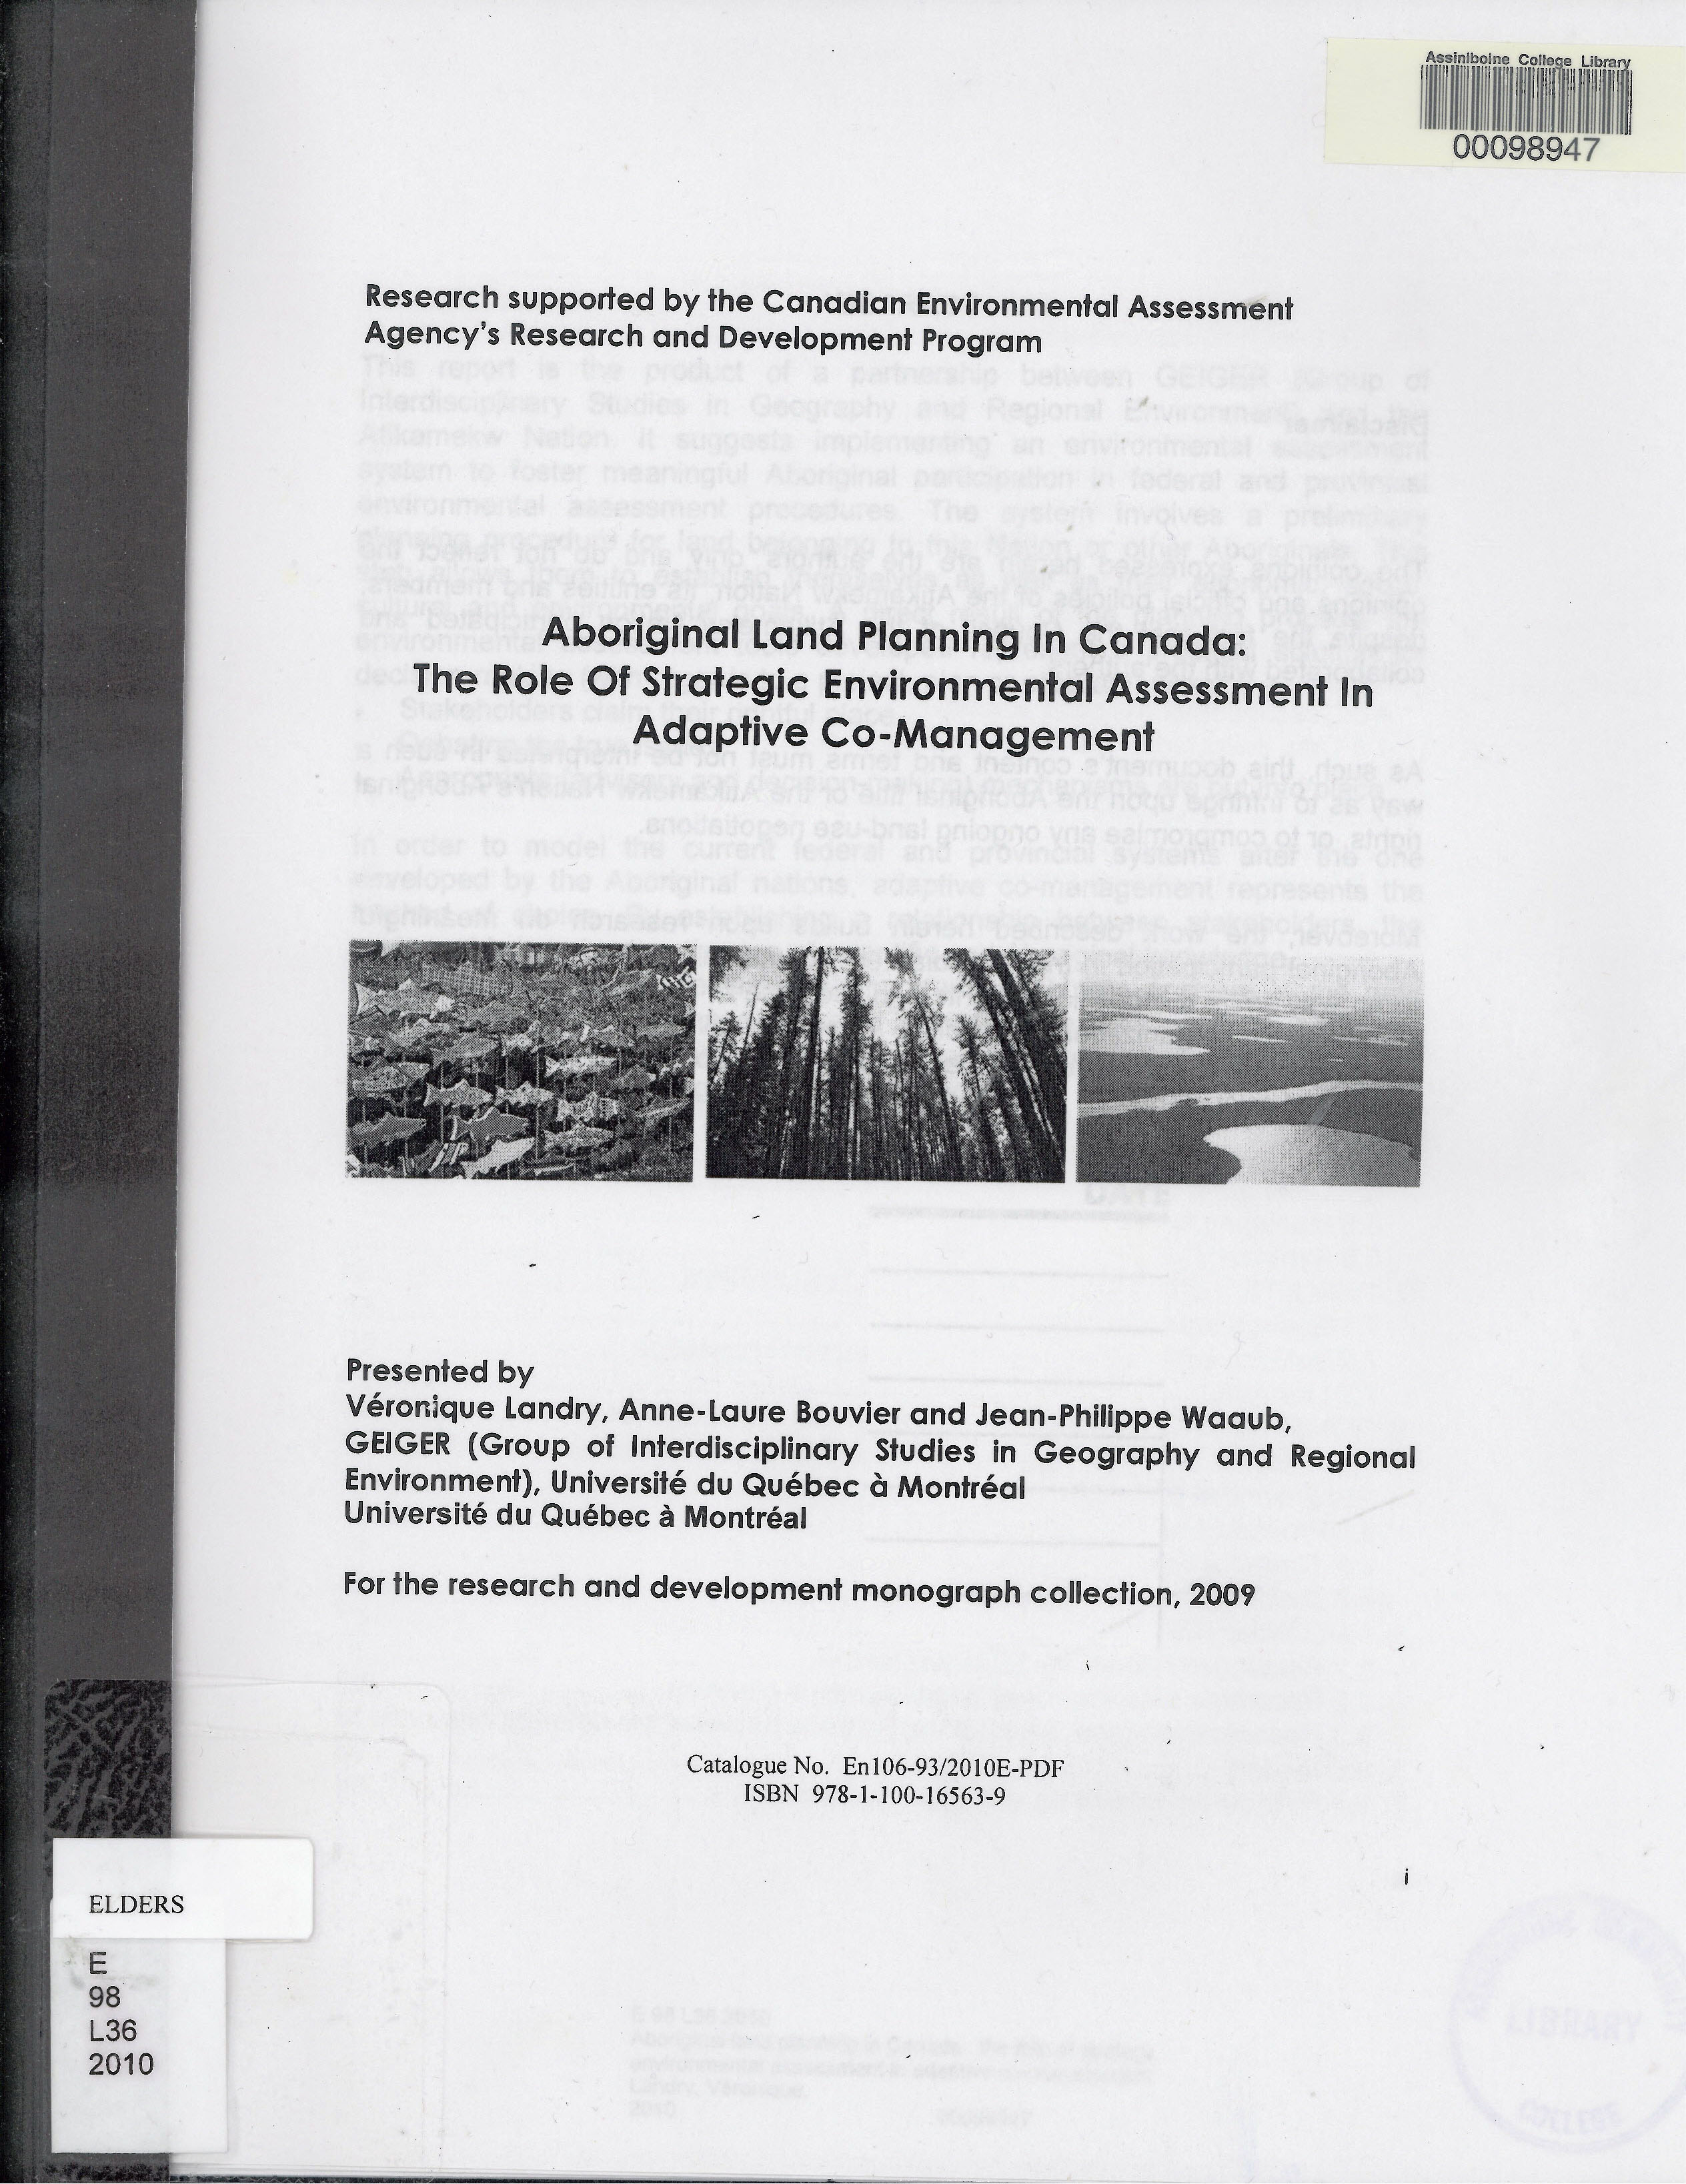 Aboriginal land planning in Canada : the role of strategic environmental assessment in adaptive co-management